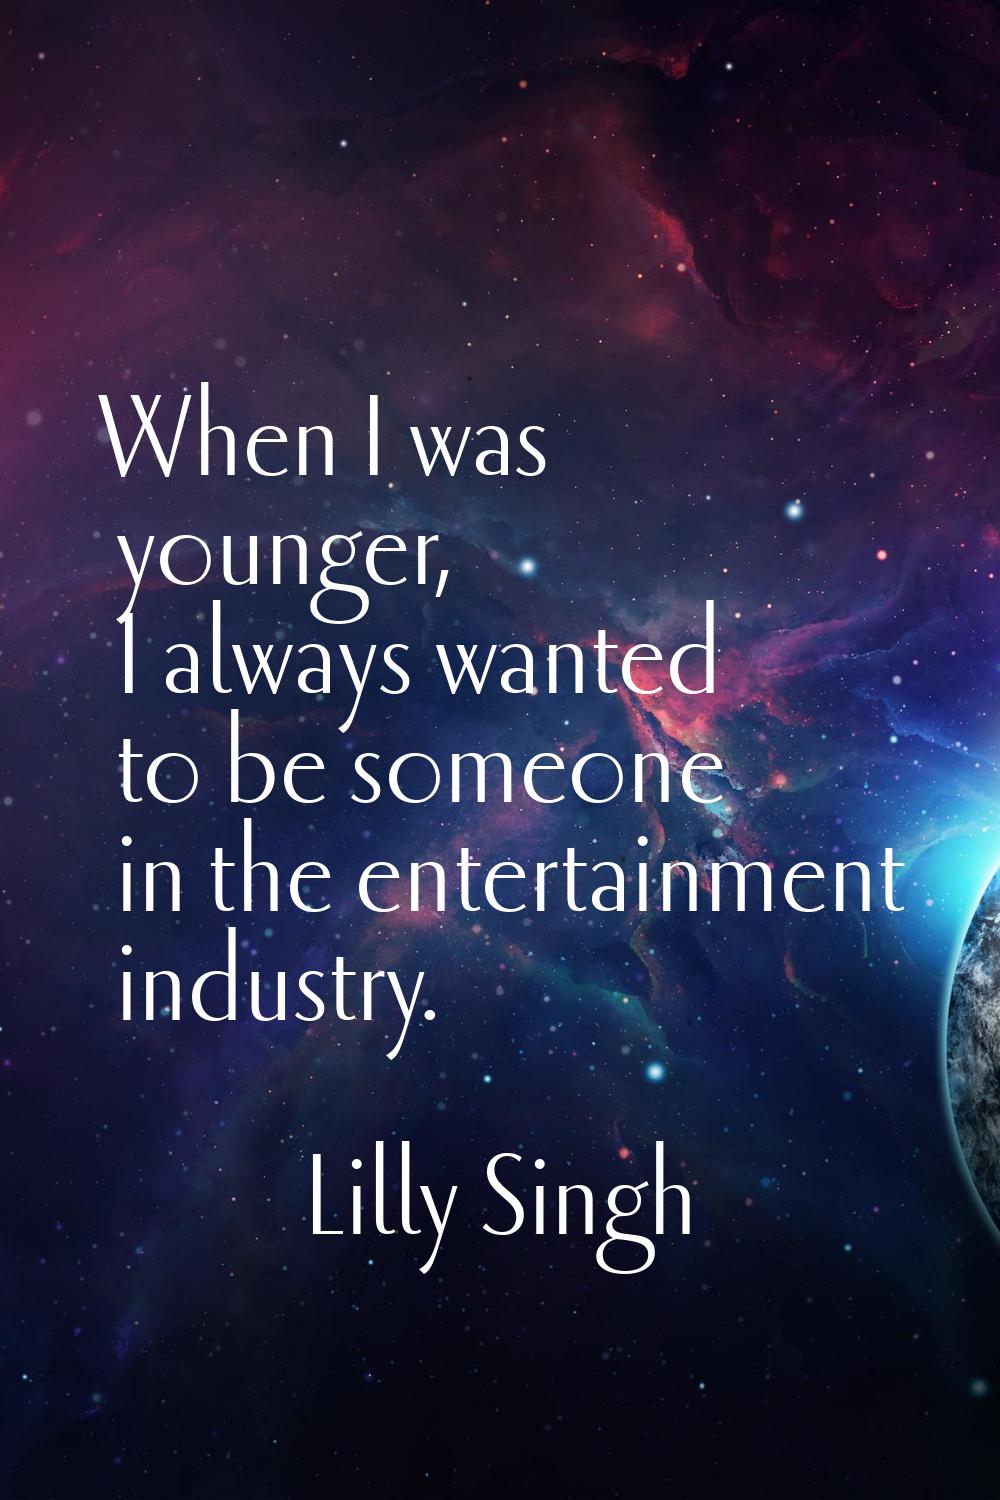 When I was younger, I always wanted to be someone in the entertainment industry.